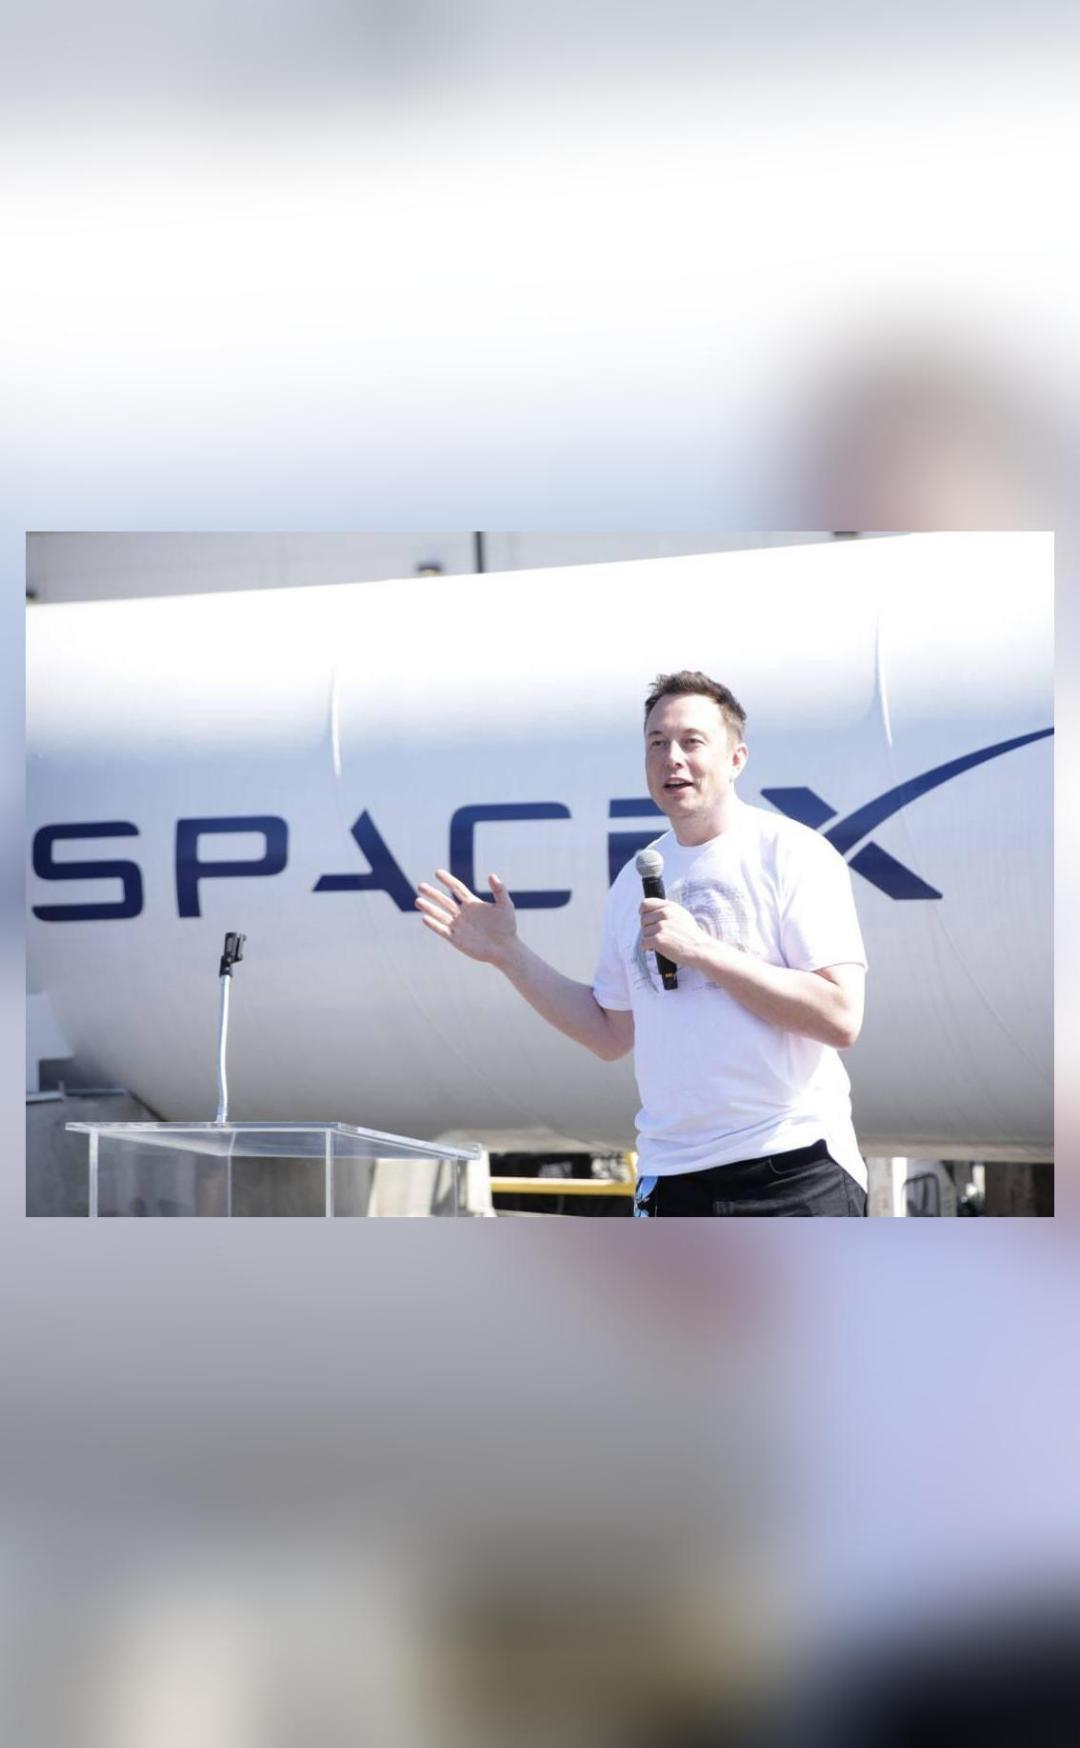 Spacex Buys 2 Offshore Oil Rigs To Turn Into Floating Launchpads Report Startup News Inshorts